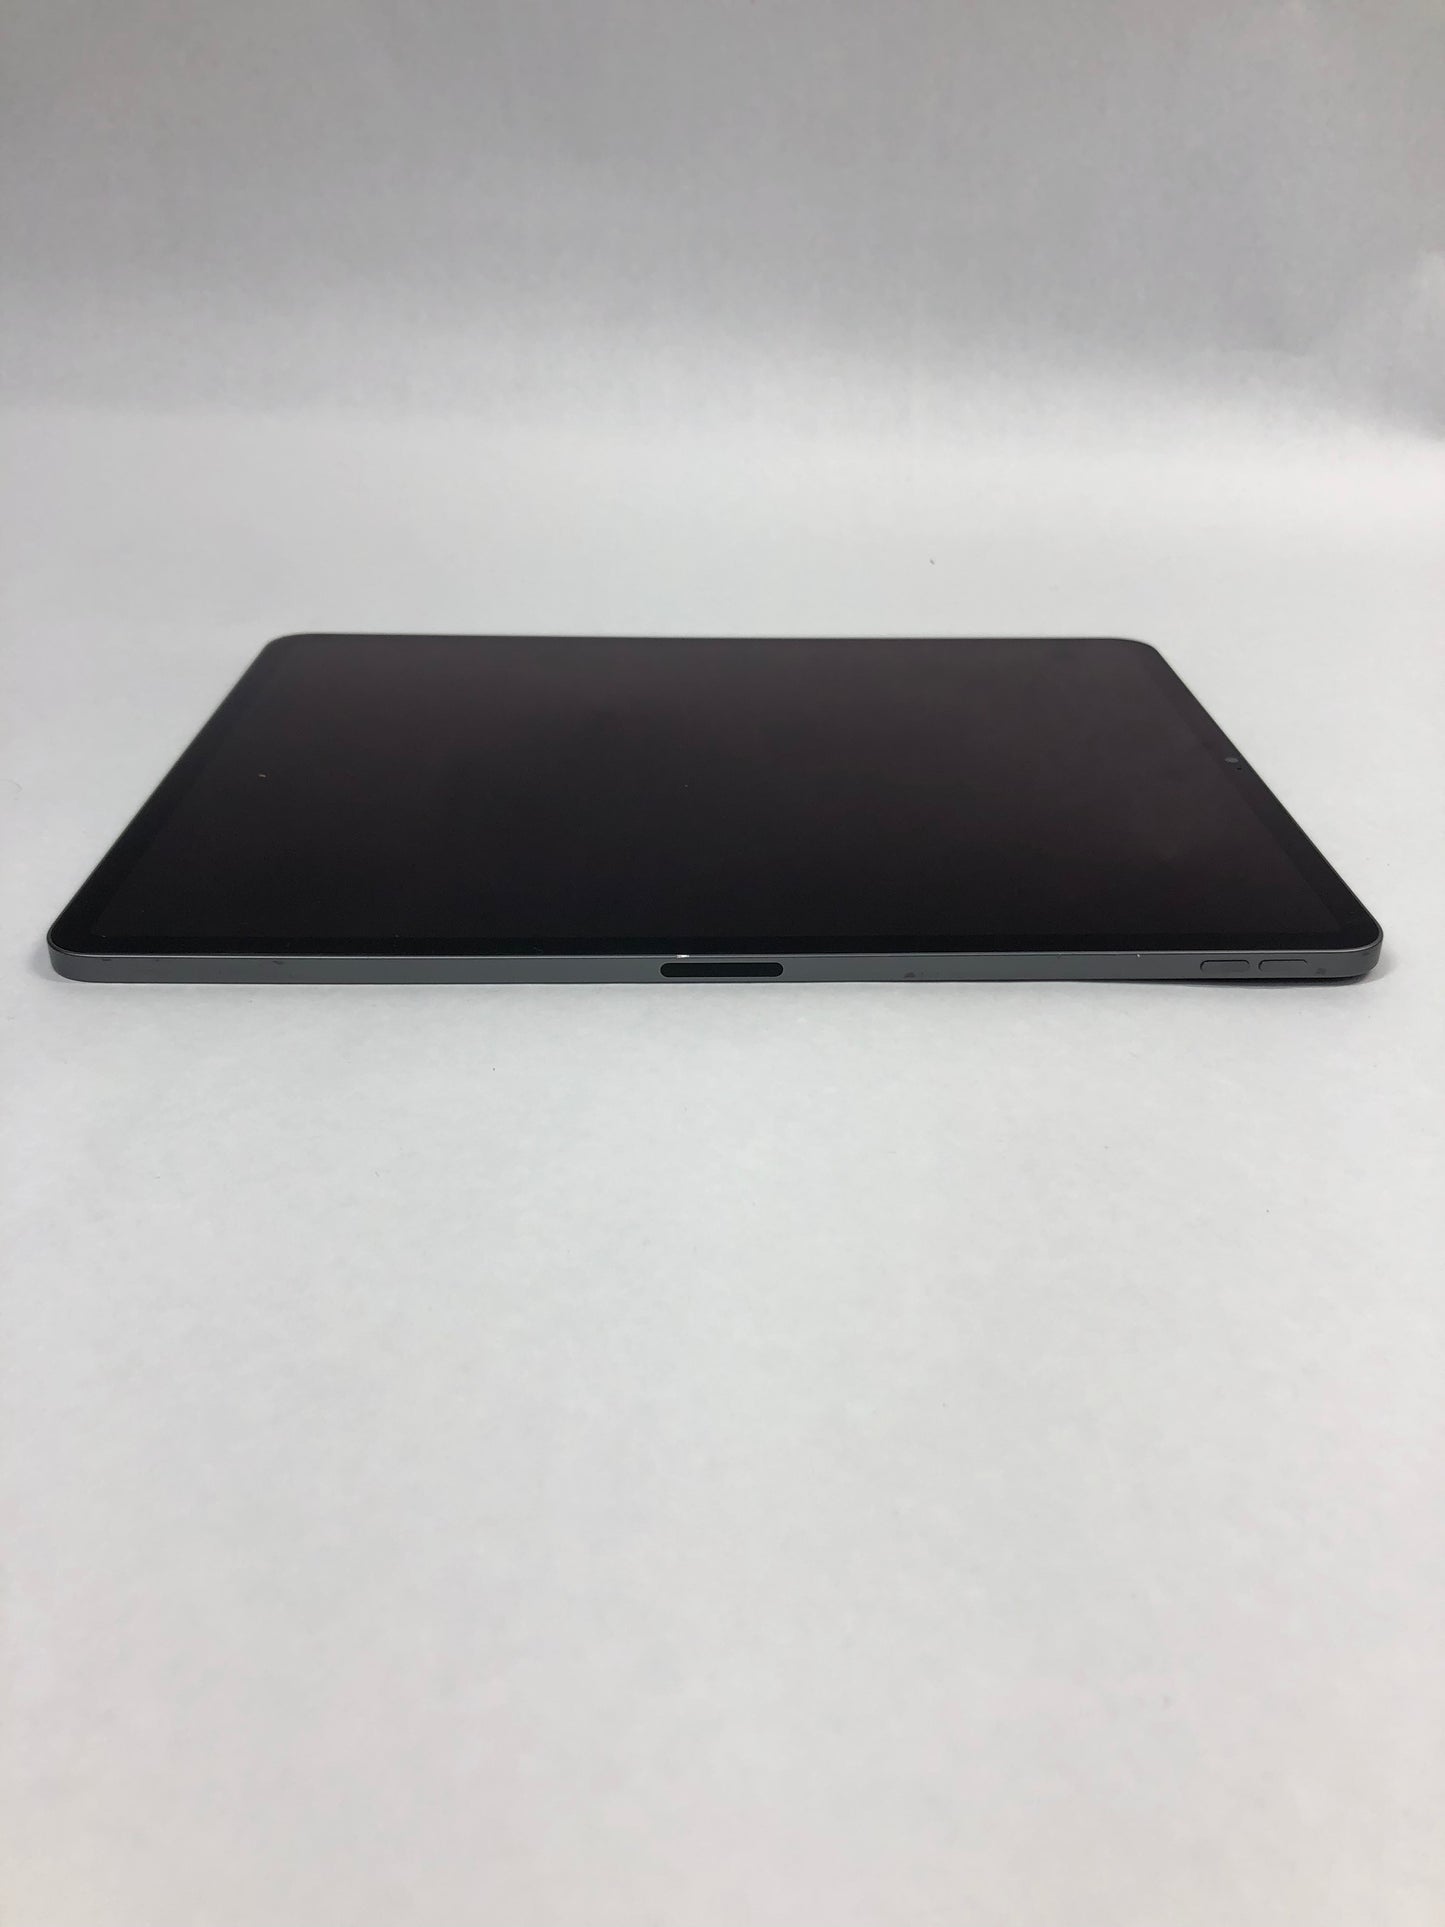 WiFi Only Apple iPad Pro 12.9" 5th Gen 128GB Space Gray MHNF3LL/A